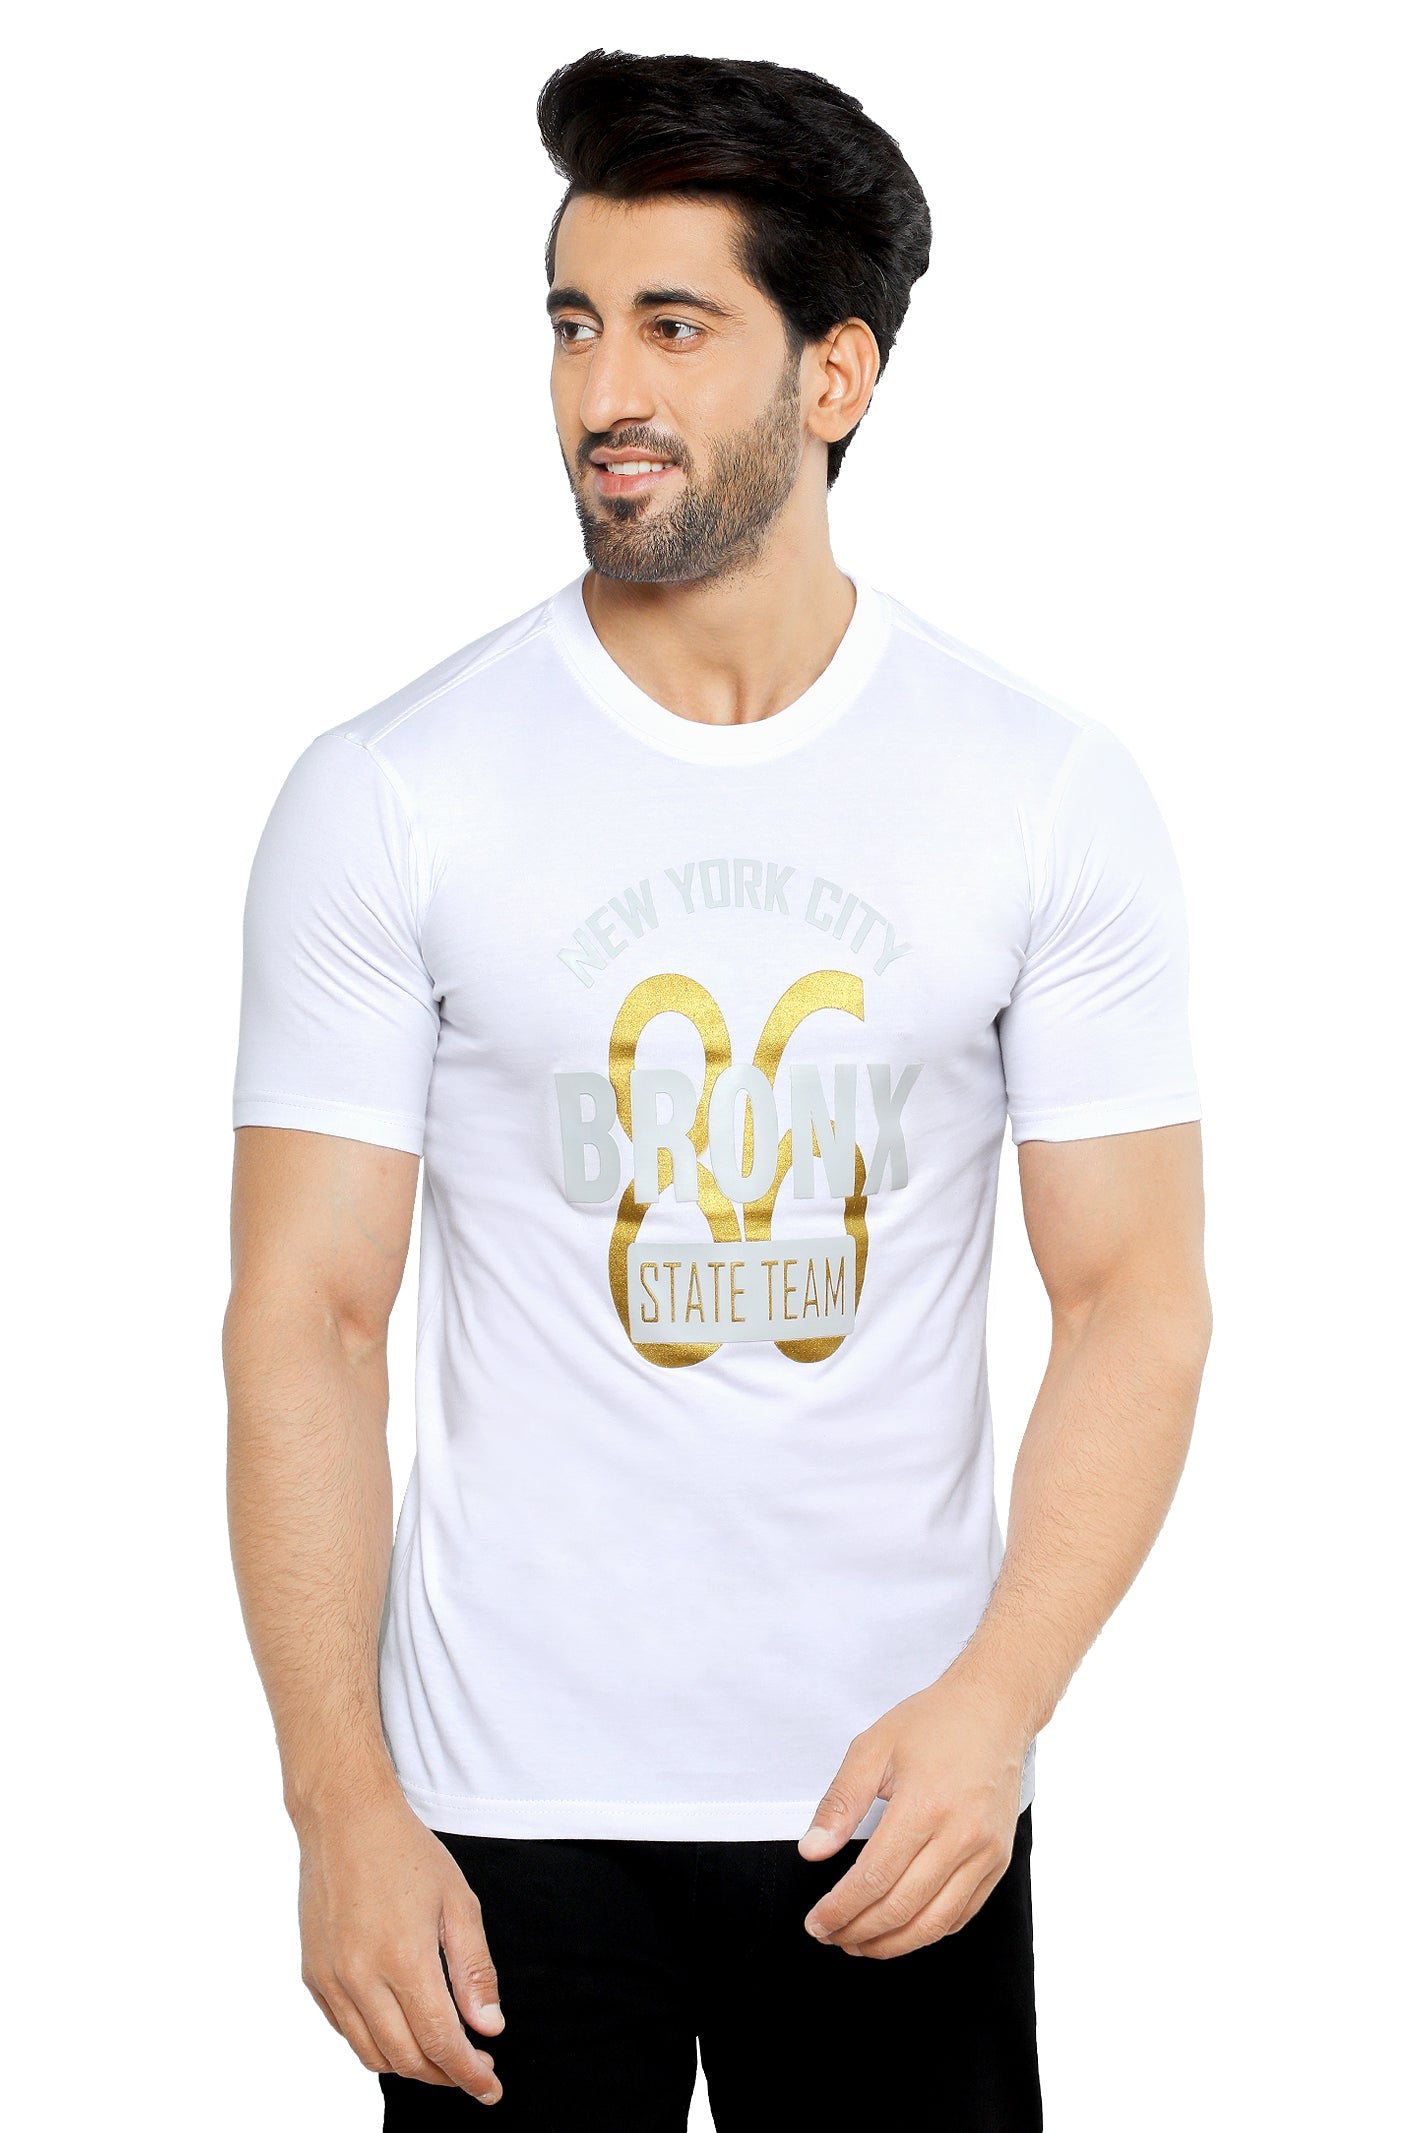 Diners Men's Round Neck T-Shirt SKU: NA799-WHITE - Diners